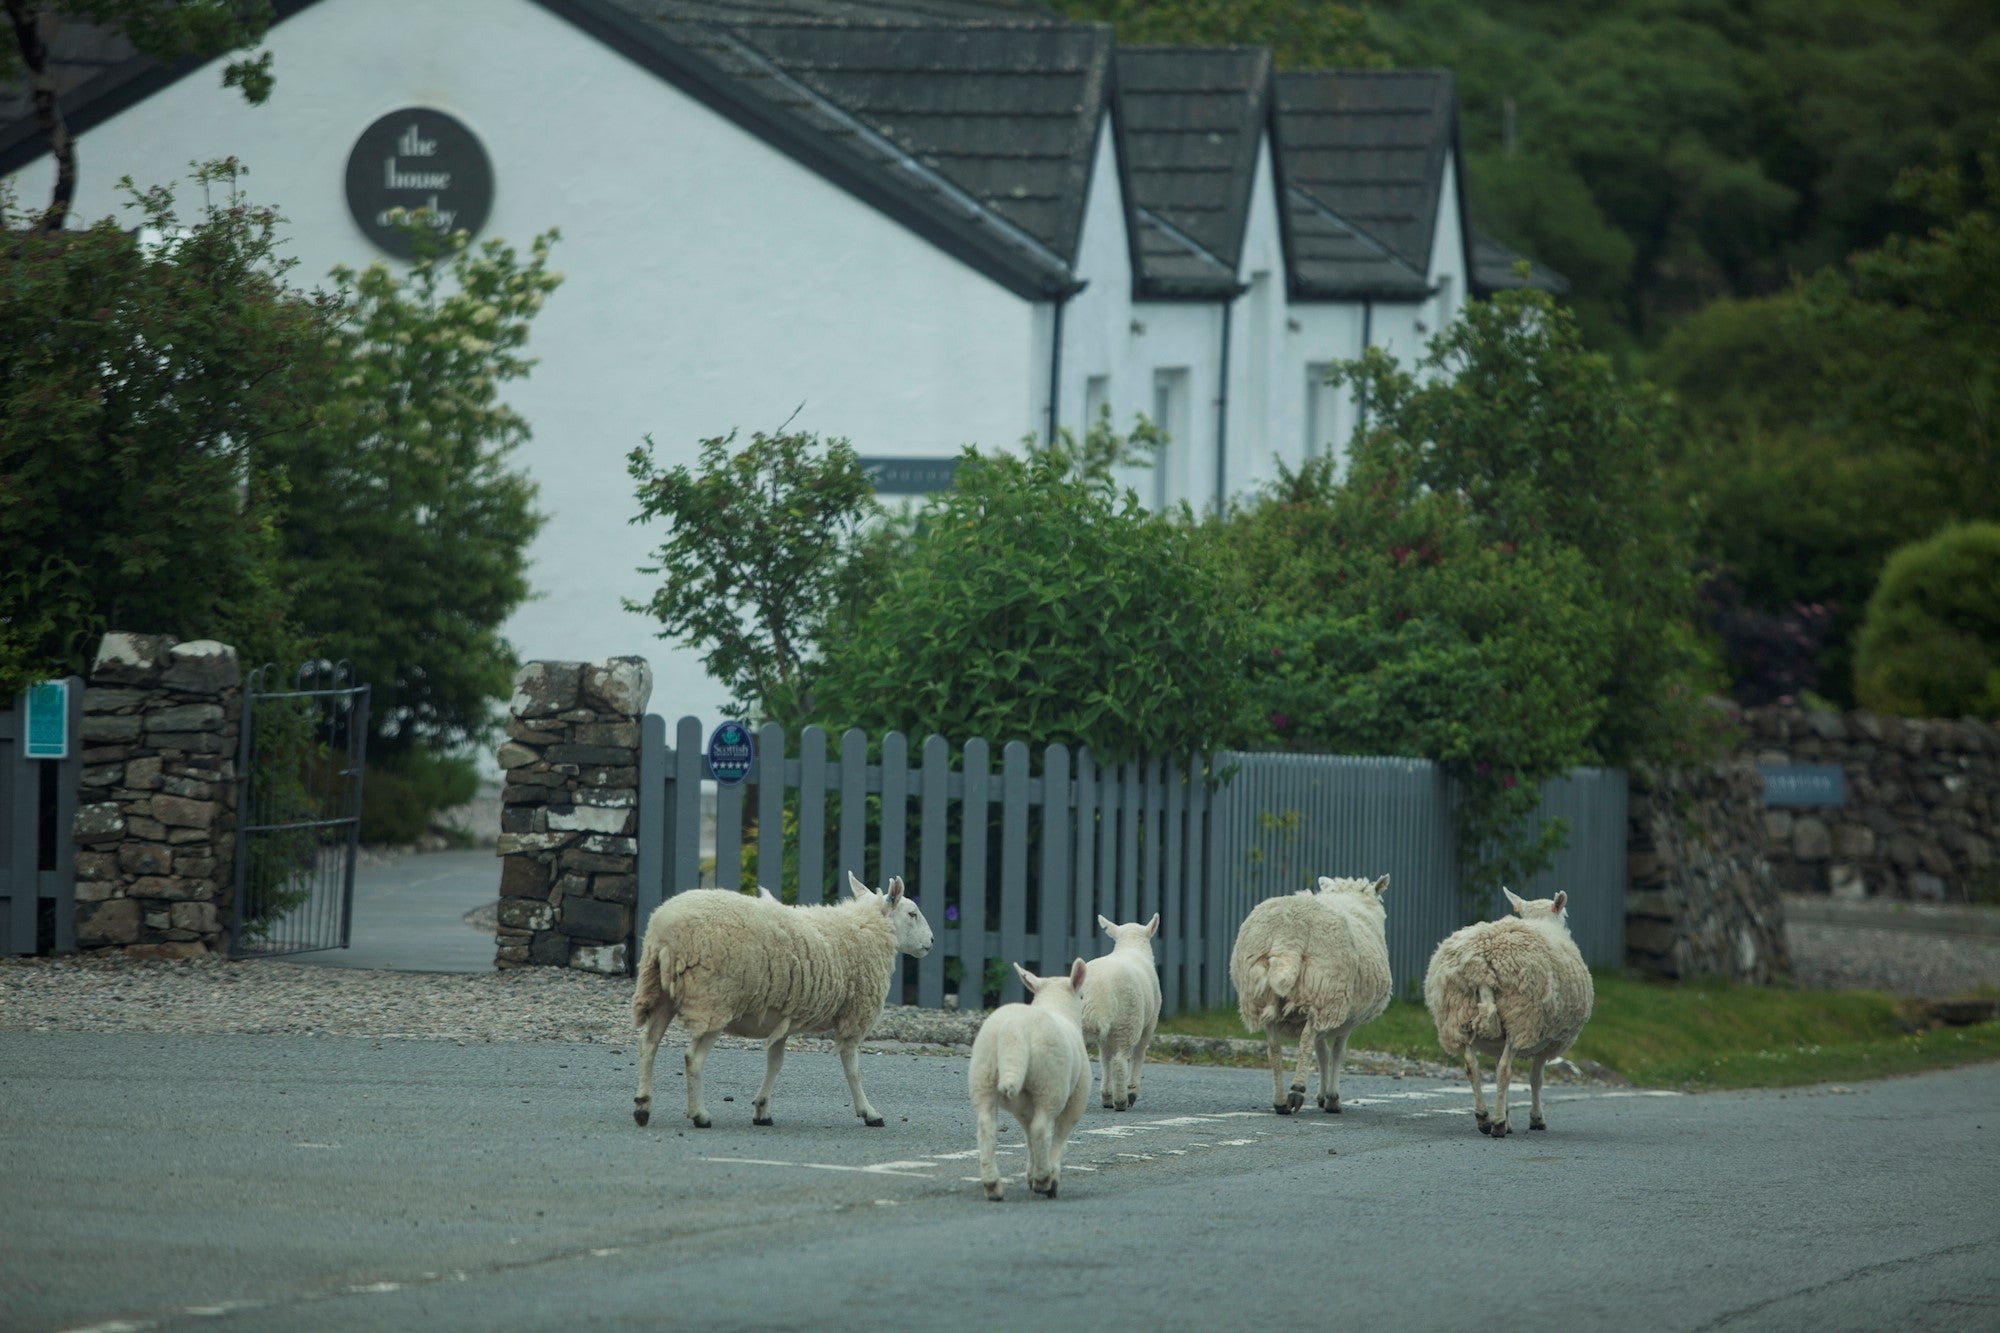 Sheep (white this time, not black) outside the Three Chimneys